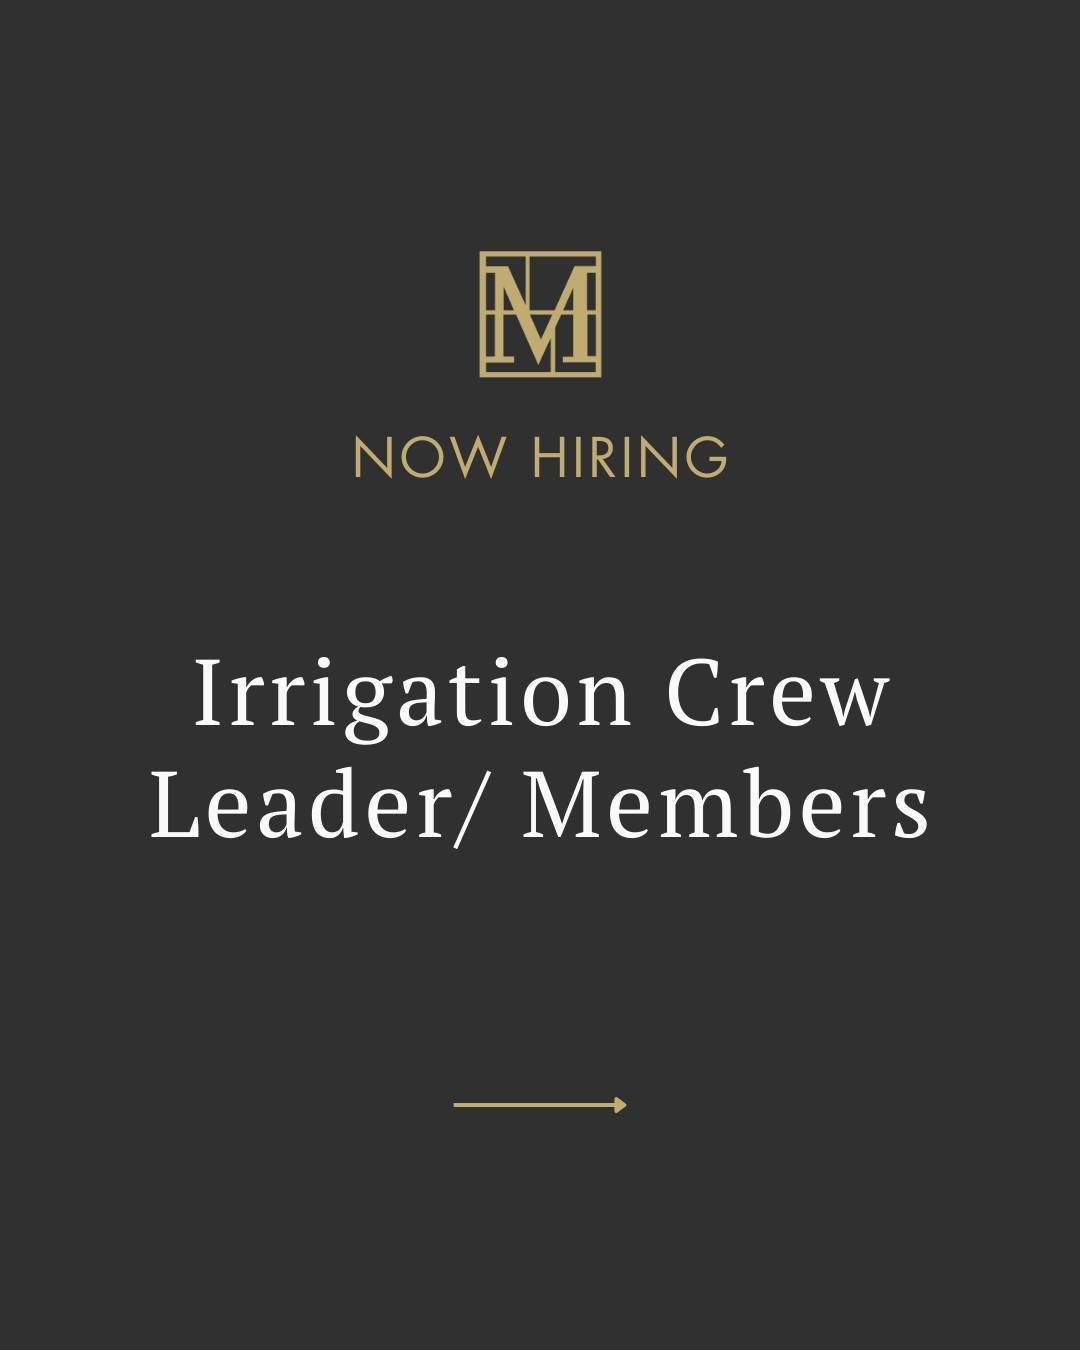 We are currently in search of skilled professionals in the green industry who have proven experience as an Irrigation Crew Leader and Team Members. Join our award-winning team, expand your experience and grow your career at the link in our bio.